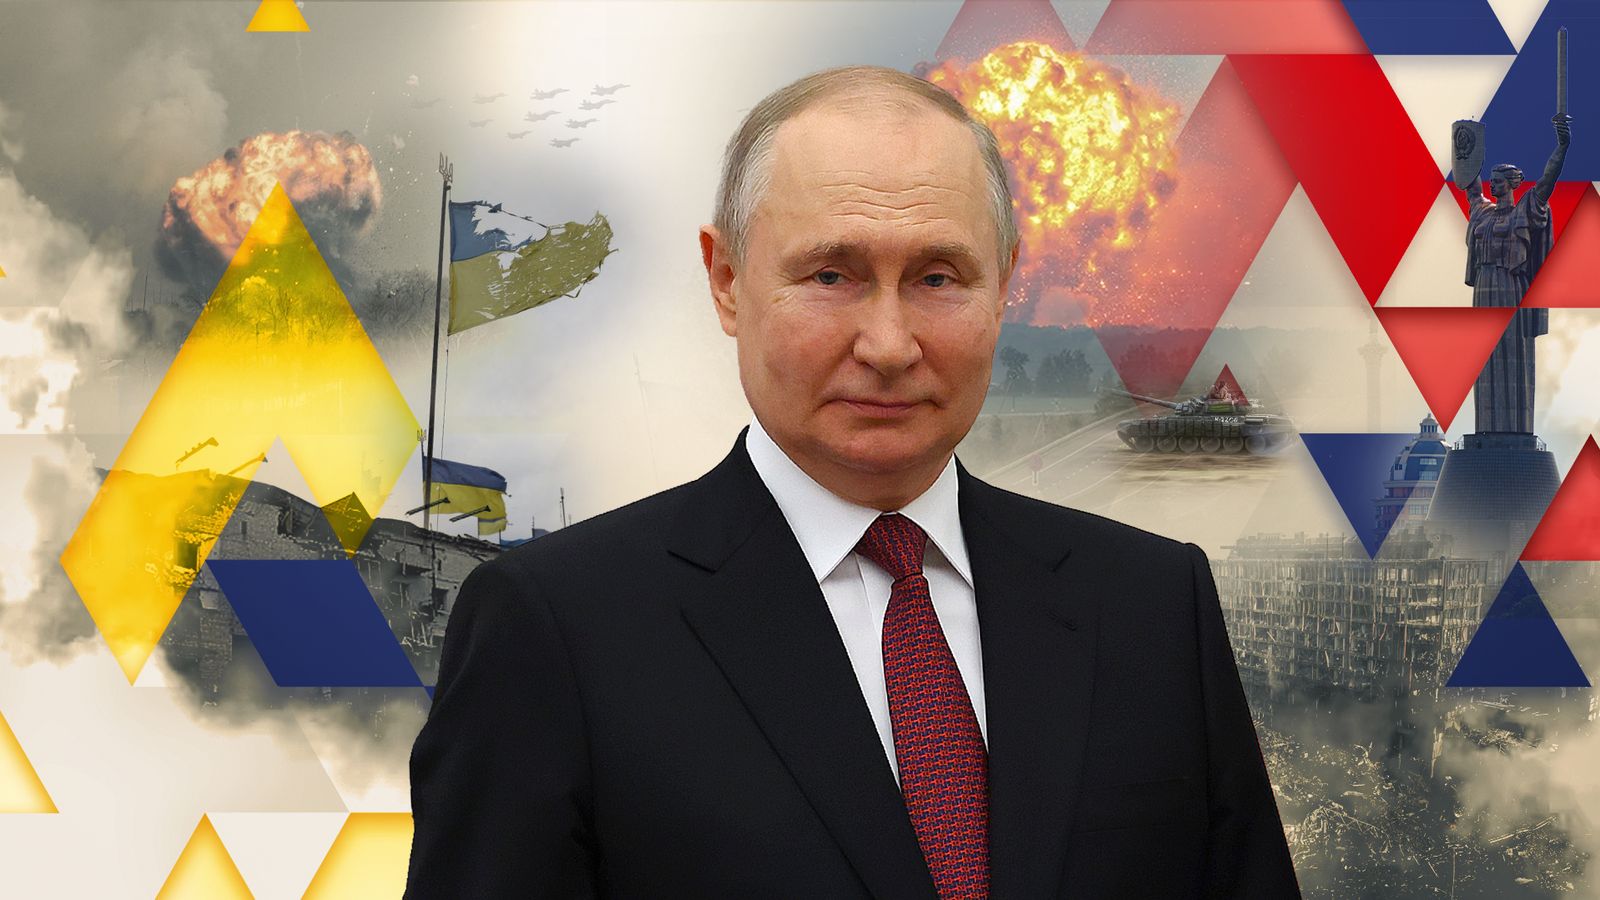 Vladimir Putin's attacks on Kyiv show his emotions are overriding military strategy